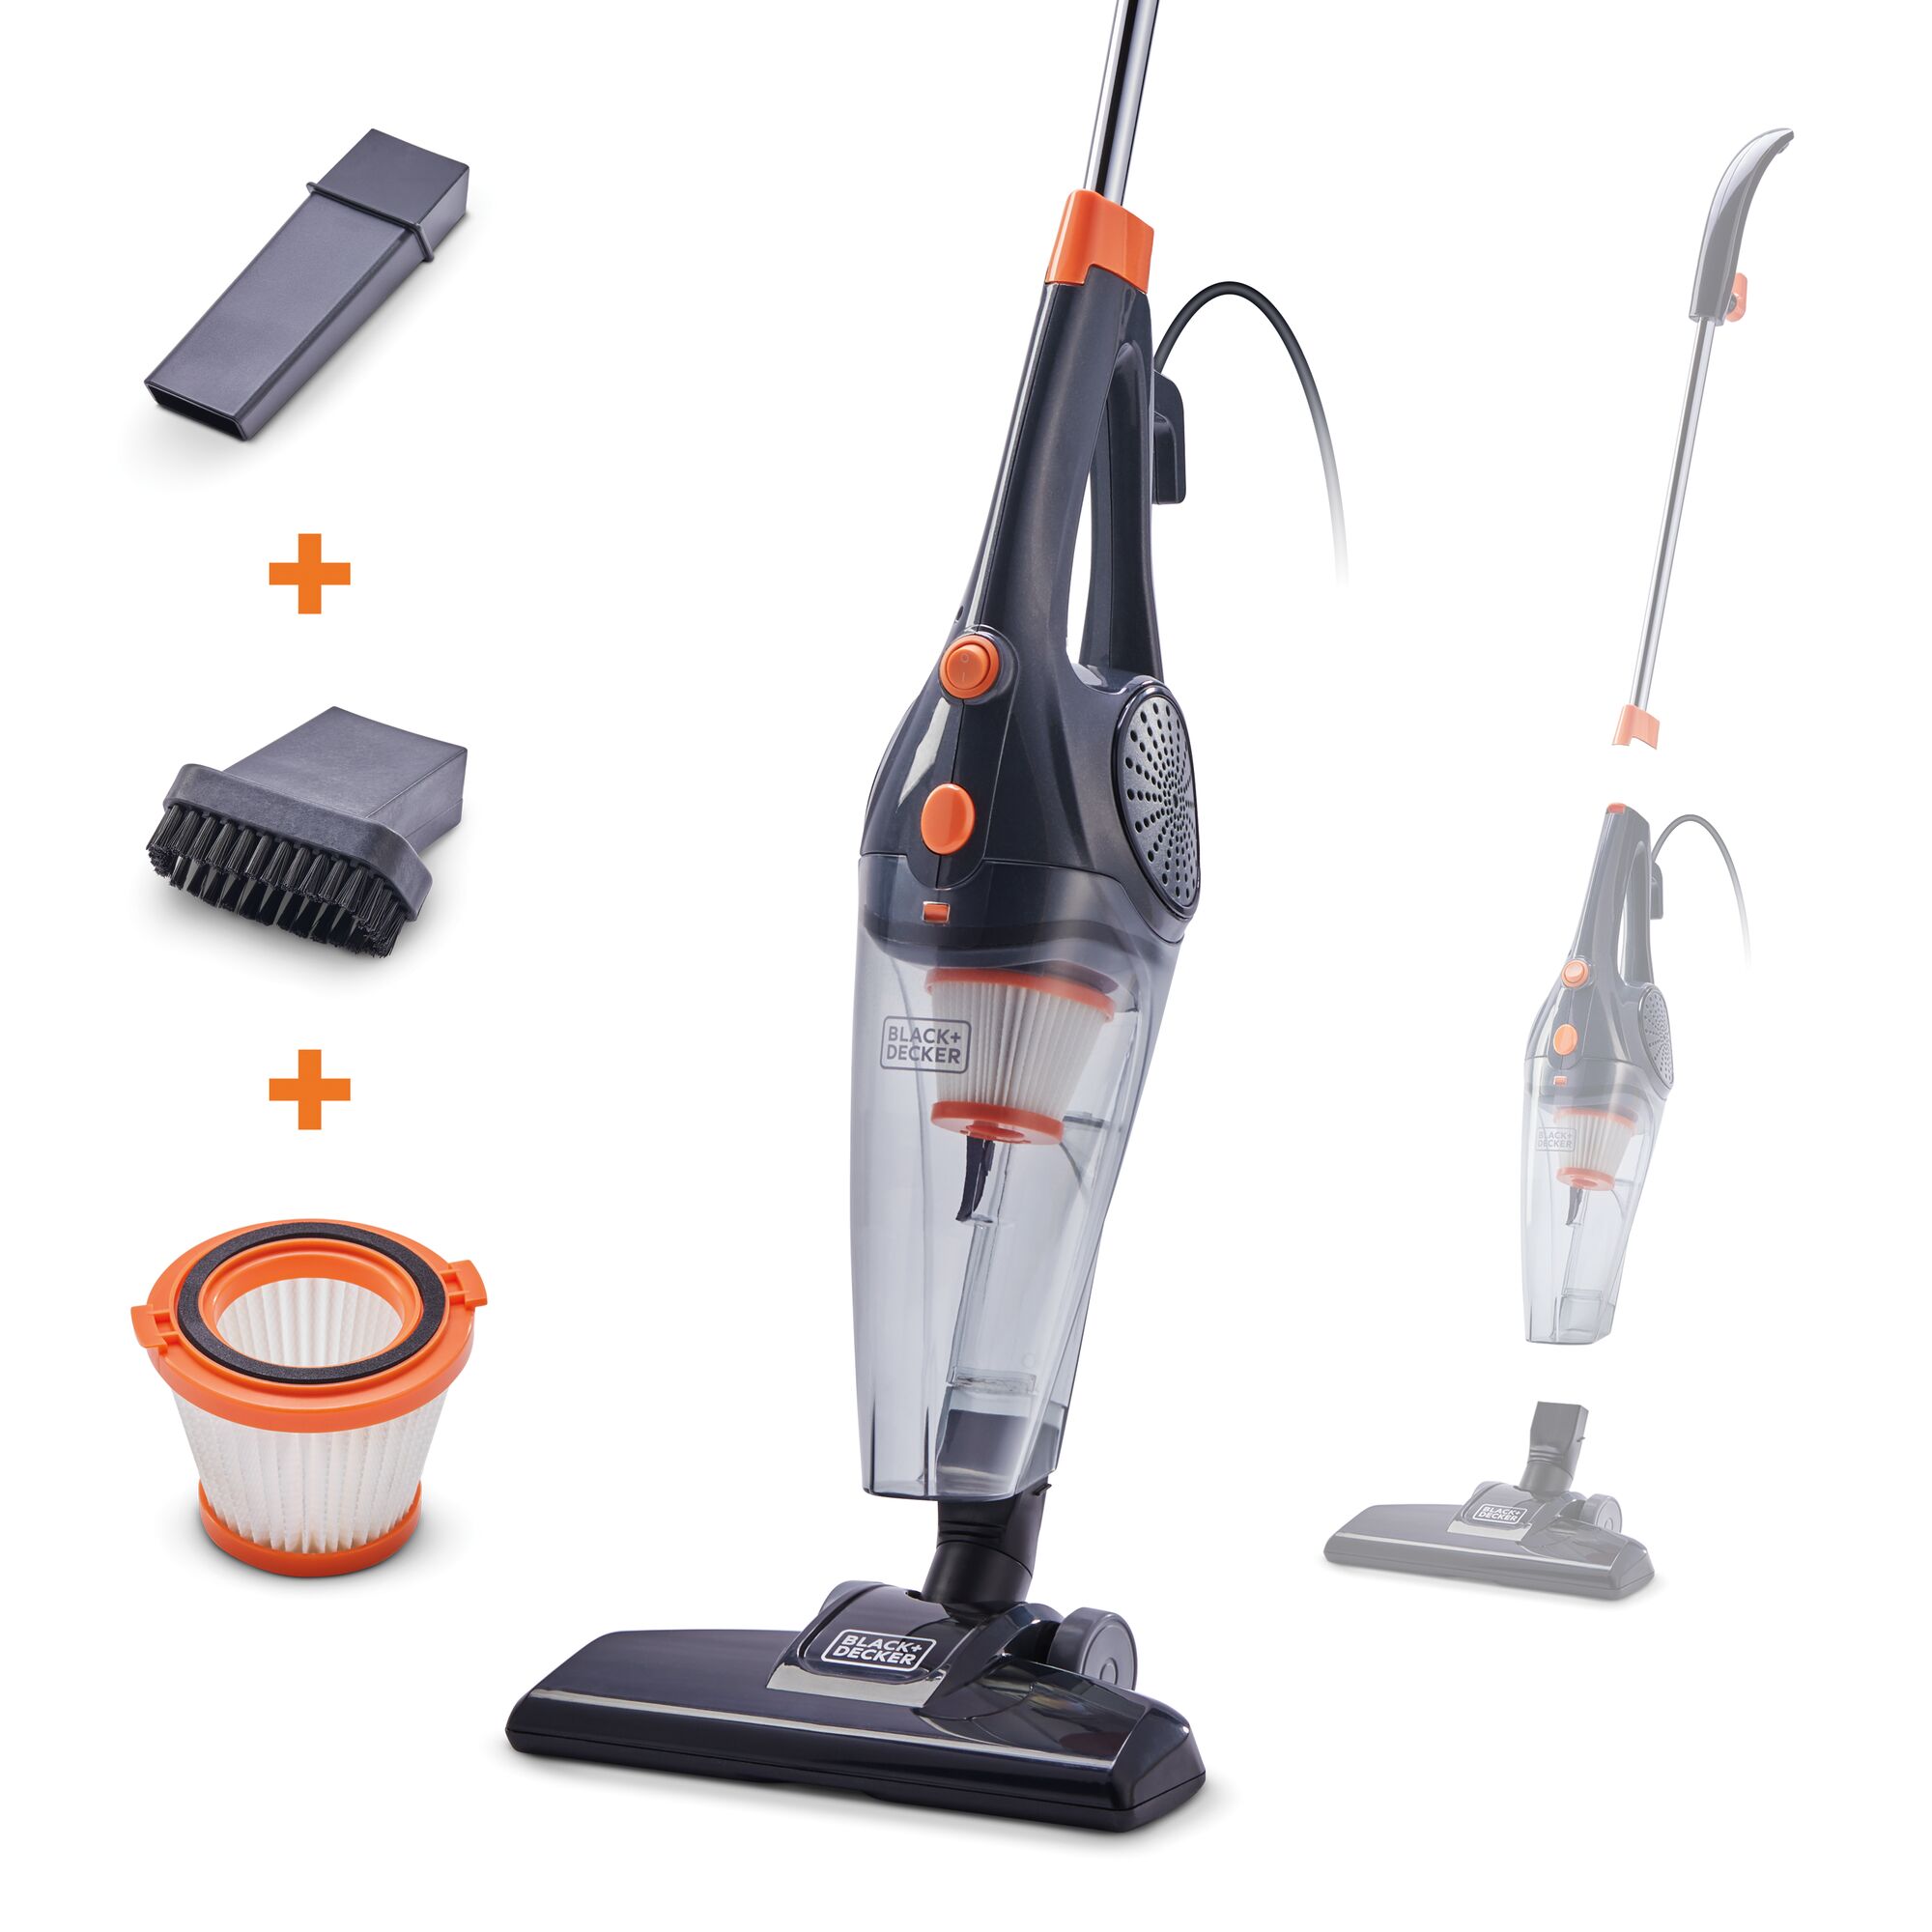 3In1 Upright Stick And Handheld Vacuum Cleaner and accessories